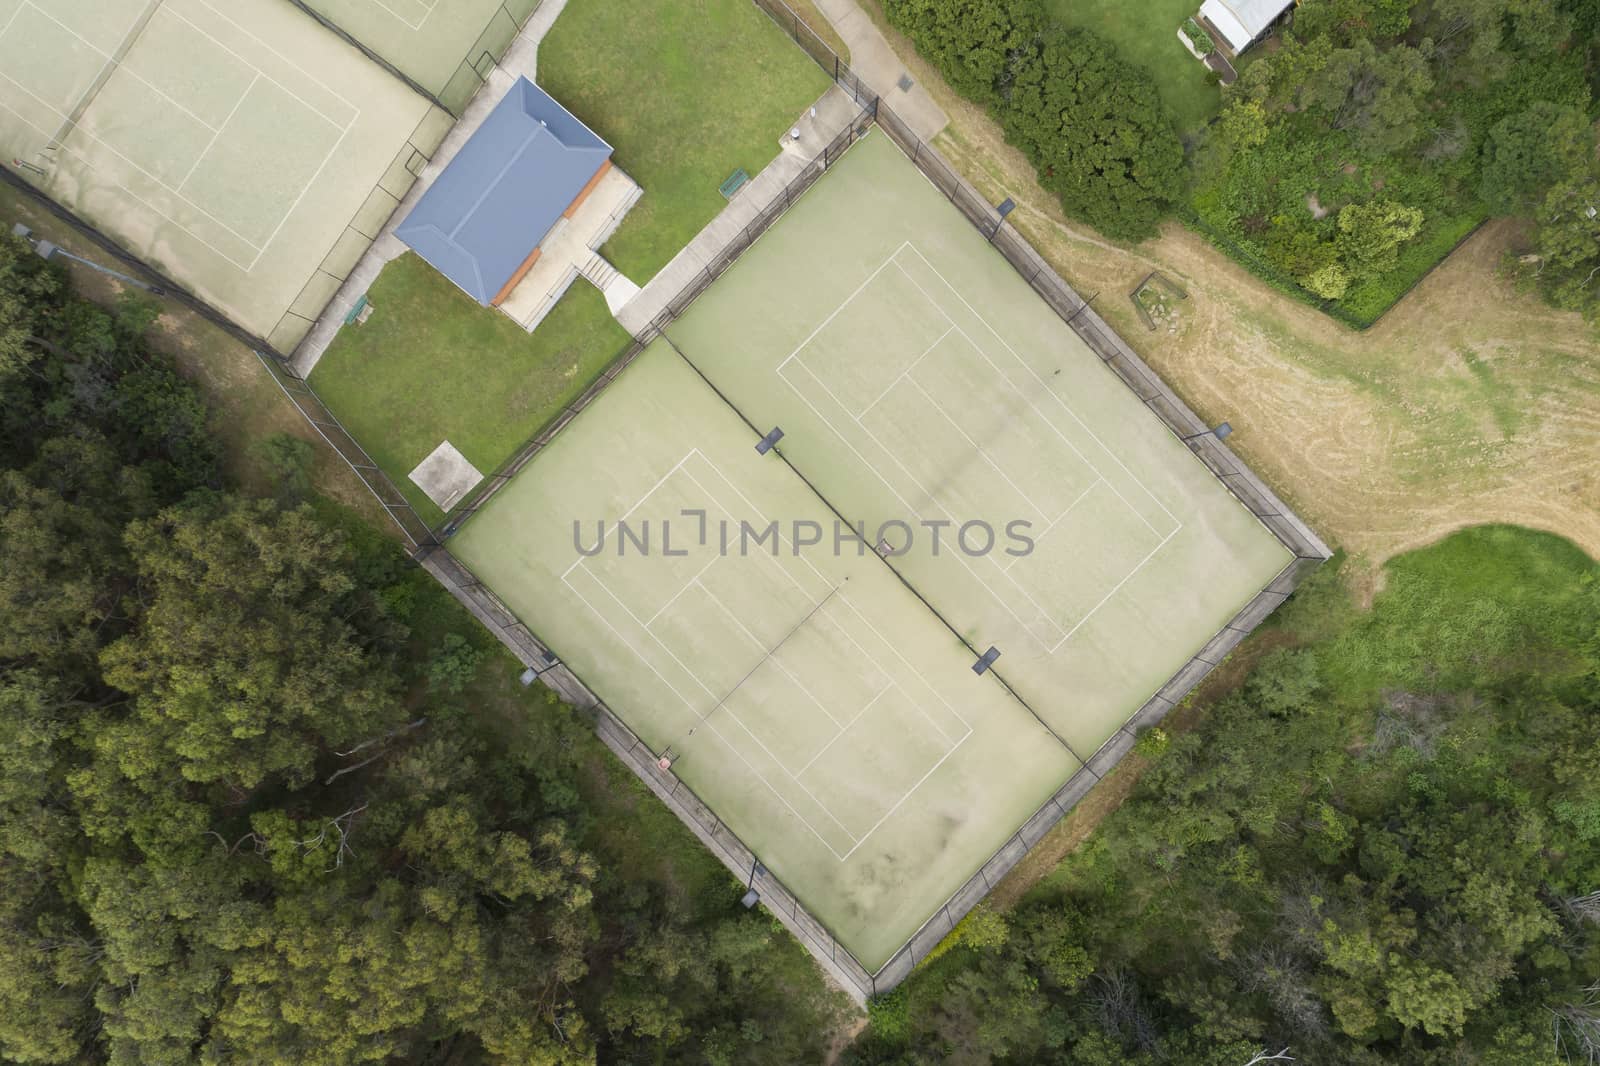 An aerial view of a tennis court in a small regional town by WittkePhotos